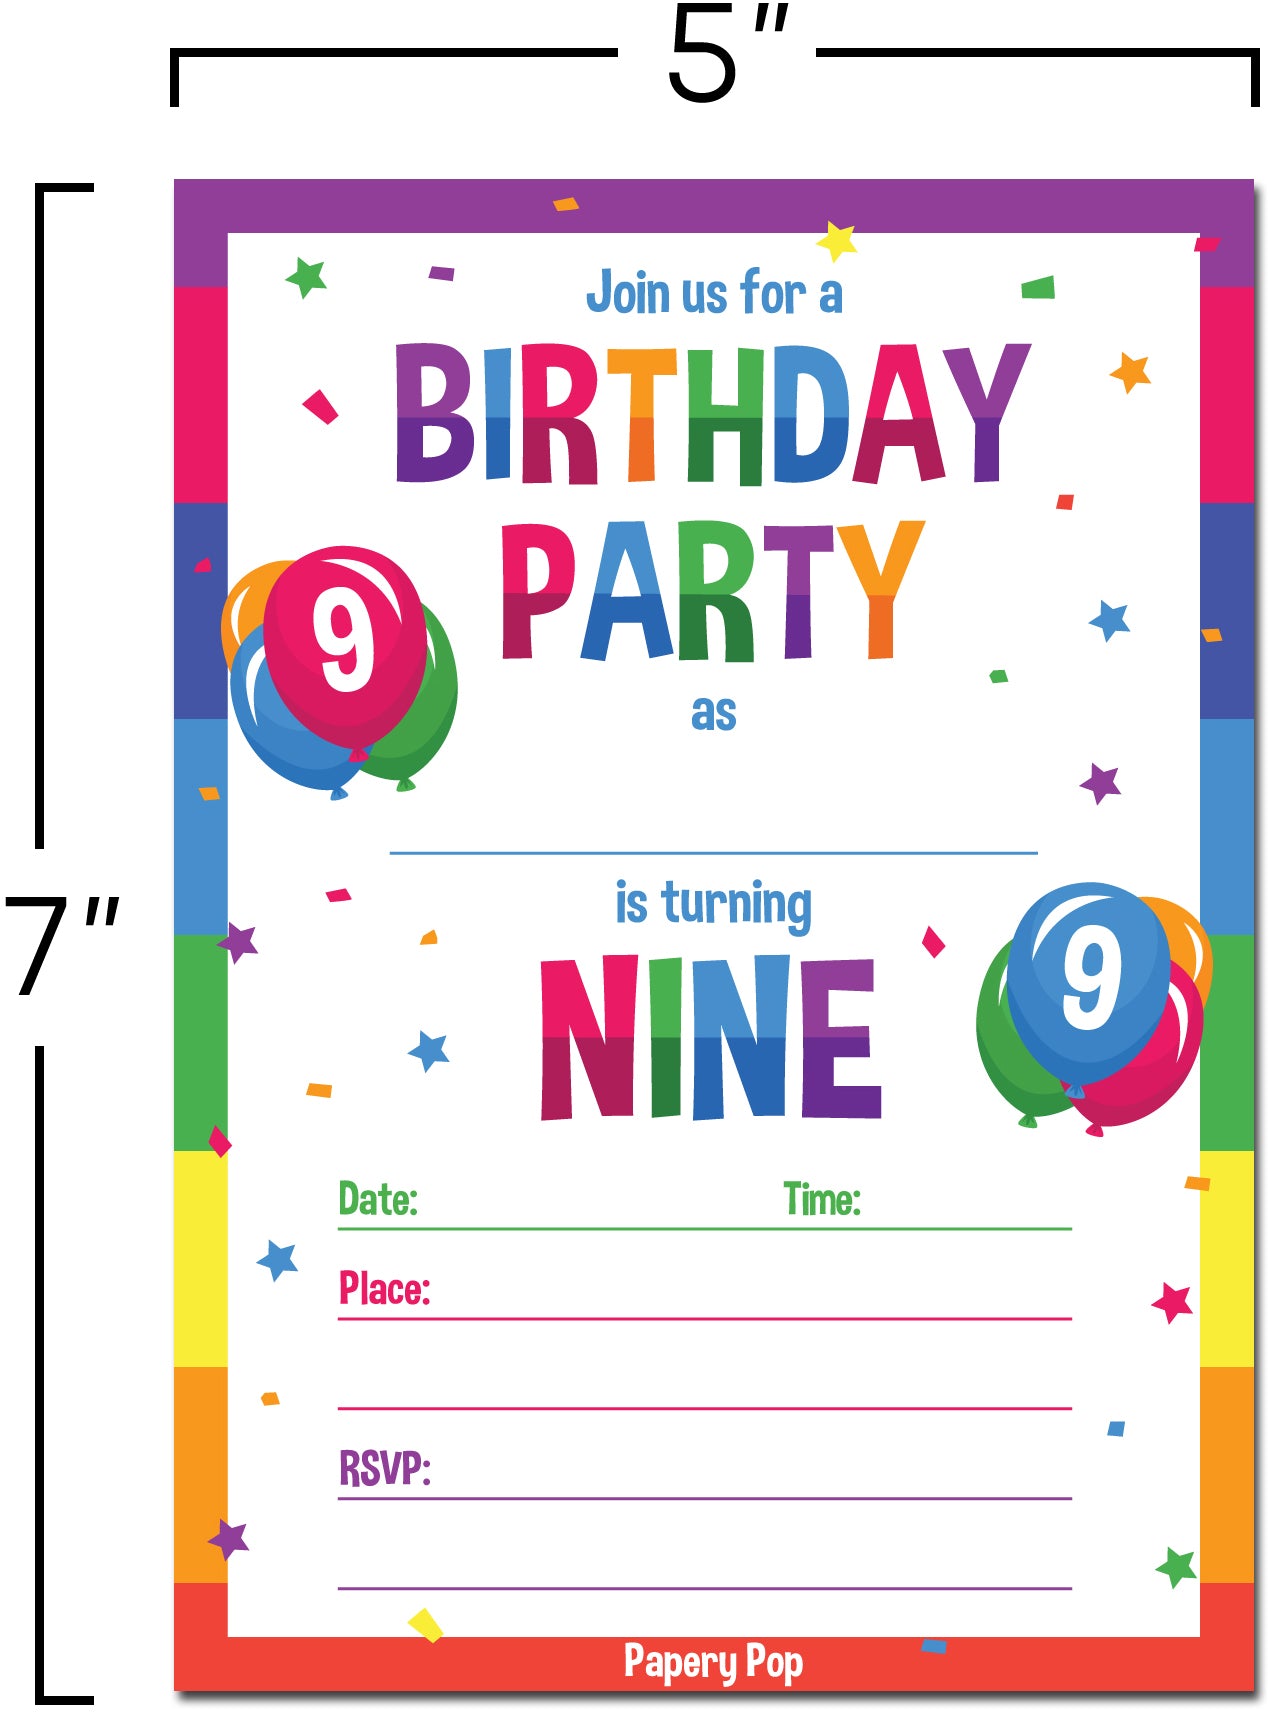 9 Year Old Birthday Party Invitations with Envelopes (15 Count) - Kids